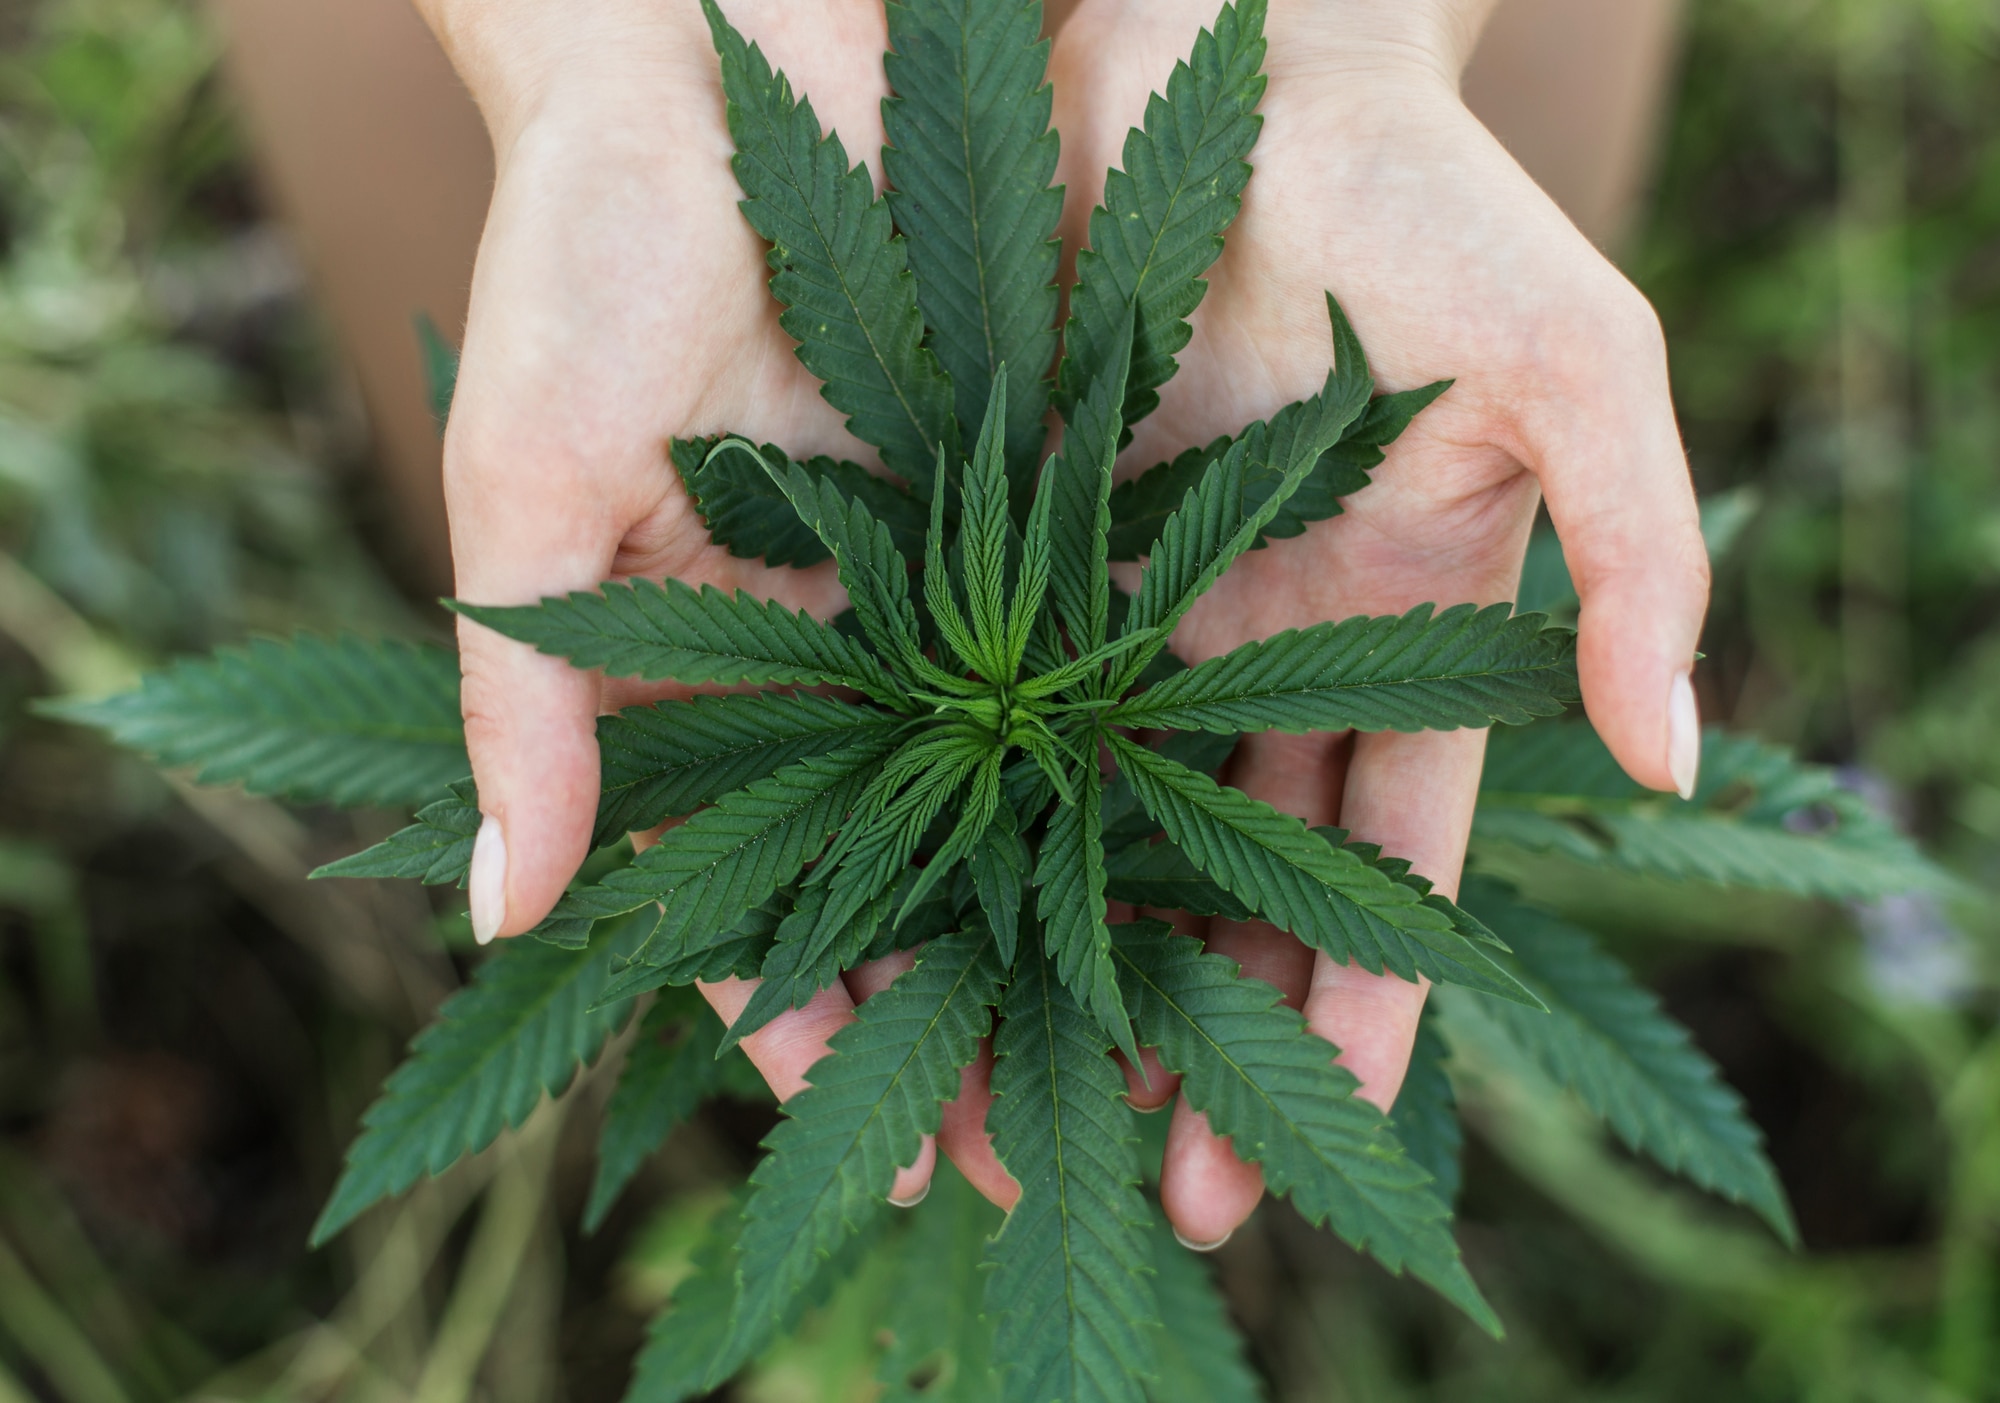 Using medical marijuana can have a negative effect on your workers' comp claim.